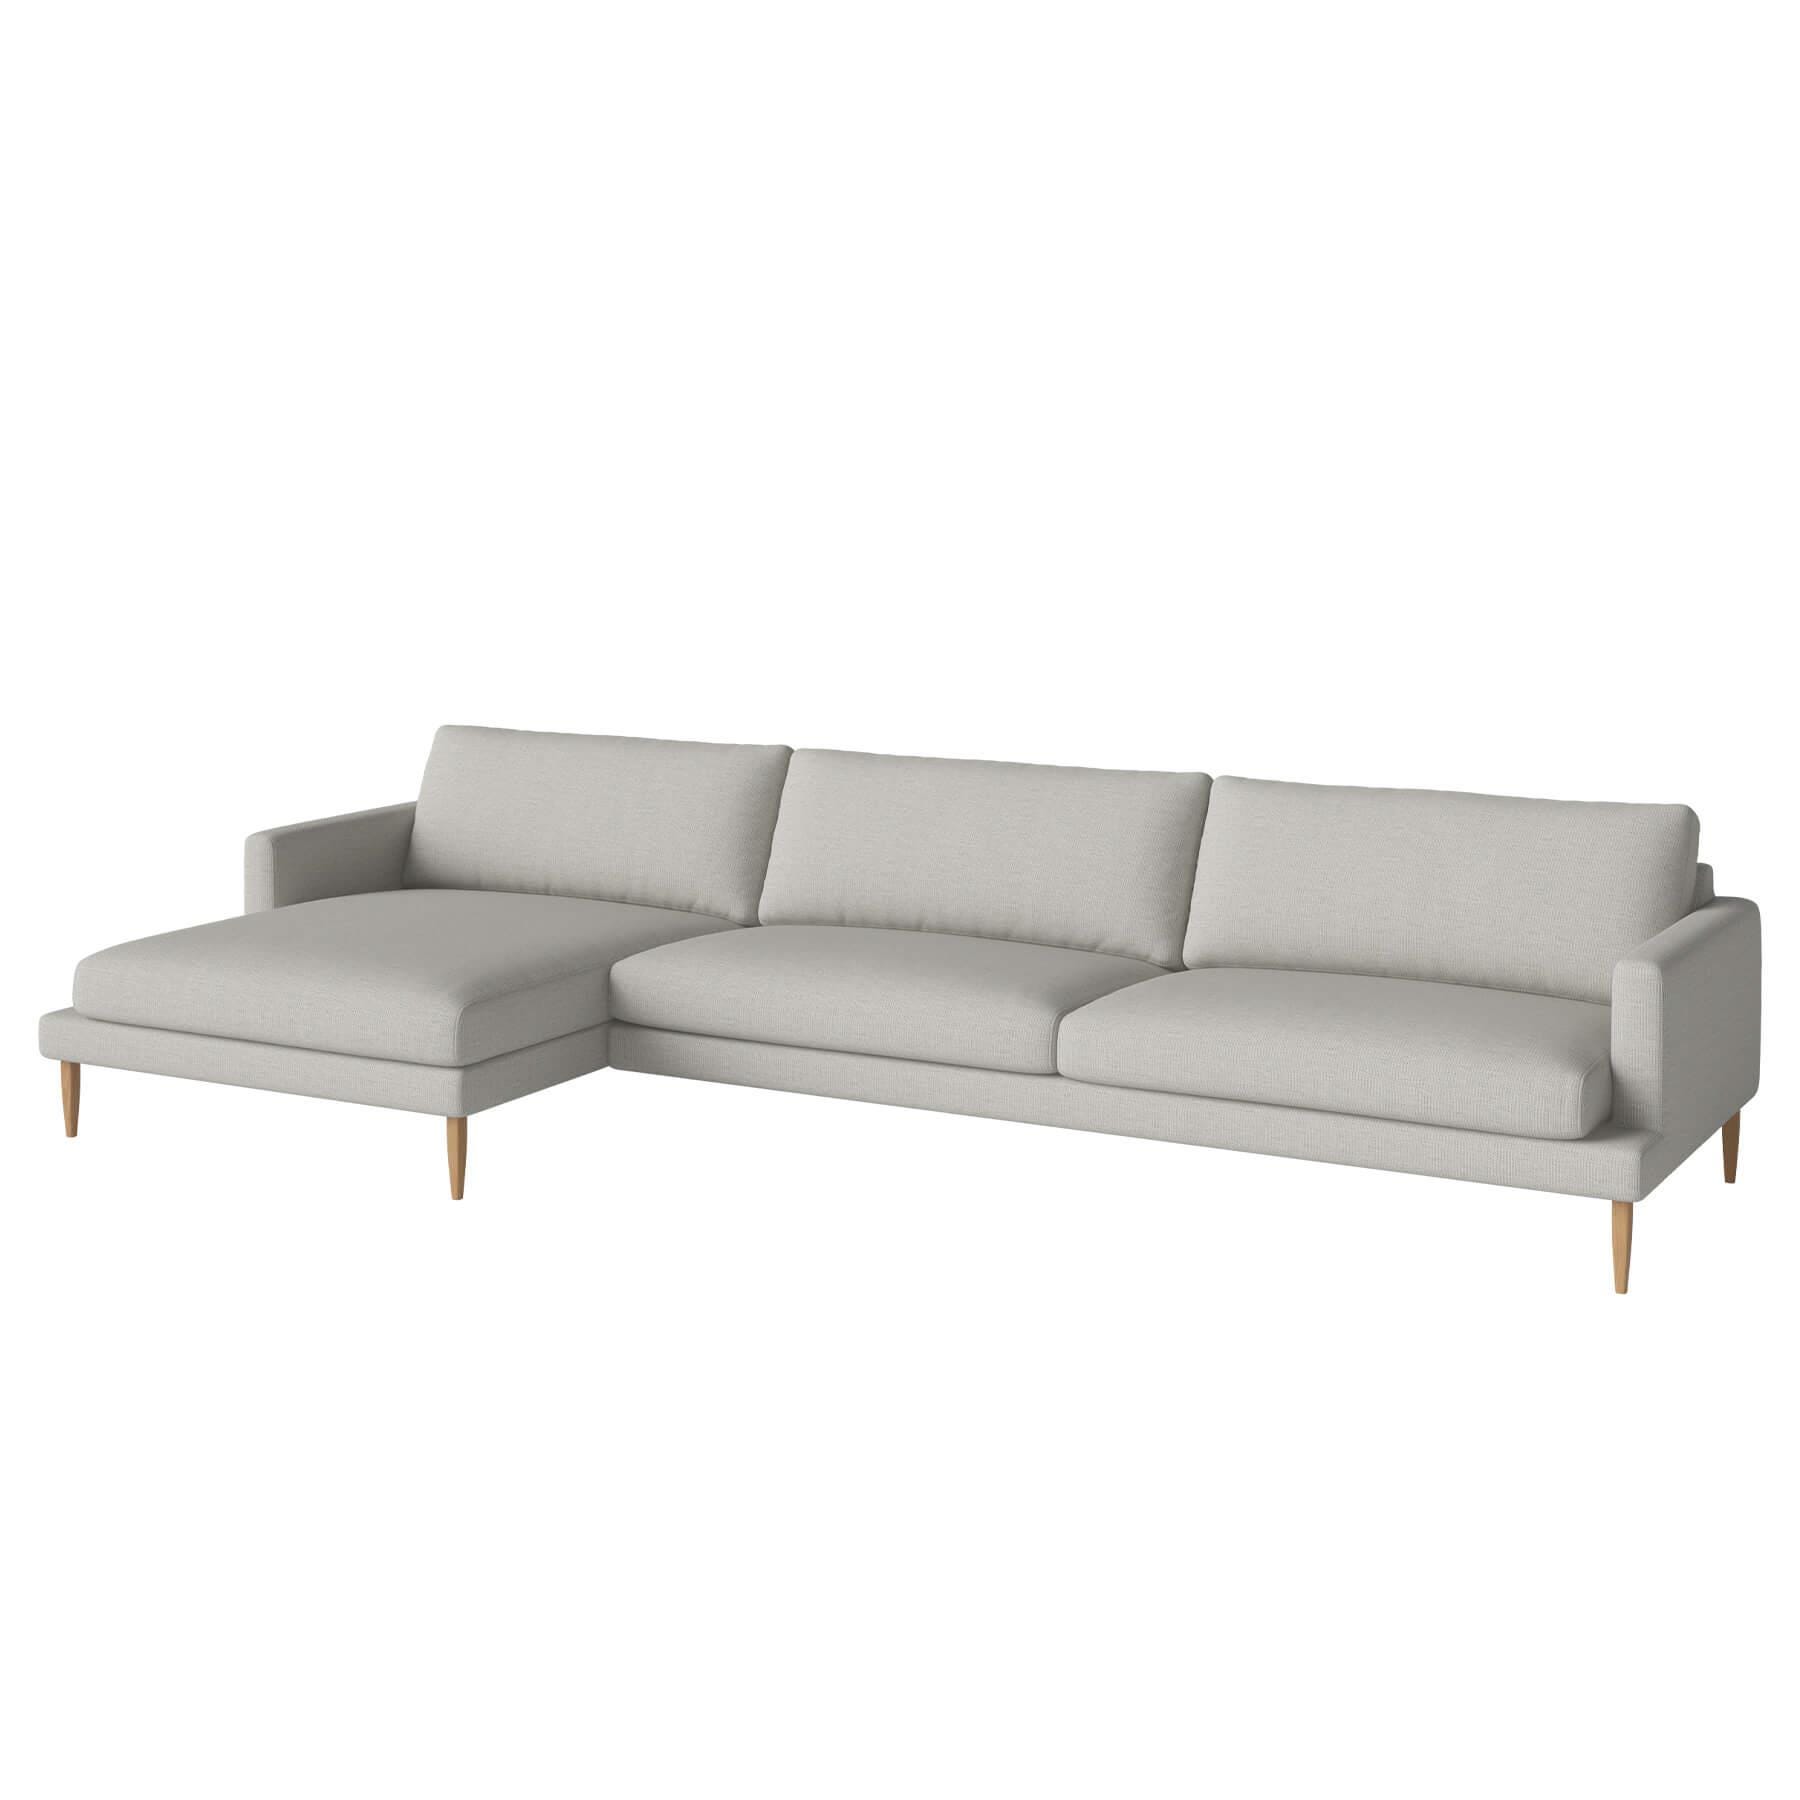 Bolia Veneda Sofa 45 Seater Sofa With Chaise Longue Oiled Oak London Dust Green Left Grey Designer Furniture From Holloways Of Ludlow